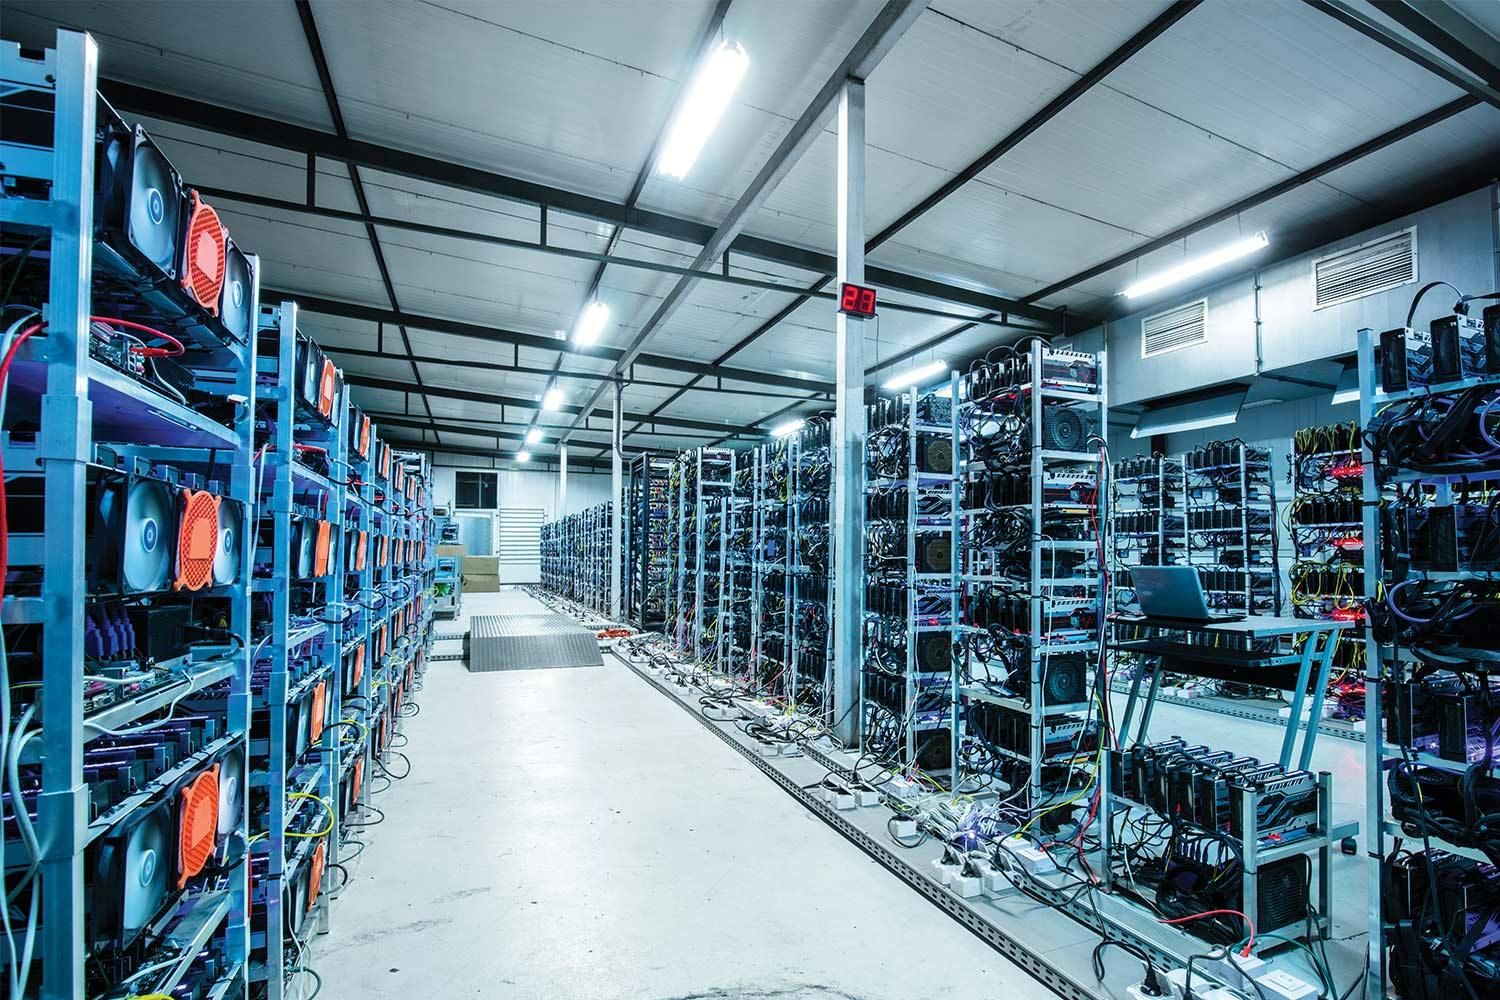 Rows of metal racks holding wiry, complex computer equipment that mine bitcoin sit in a warehouse lit by fluorescent lights.